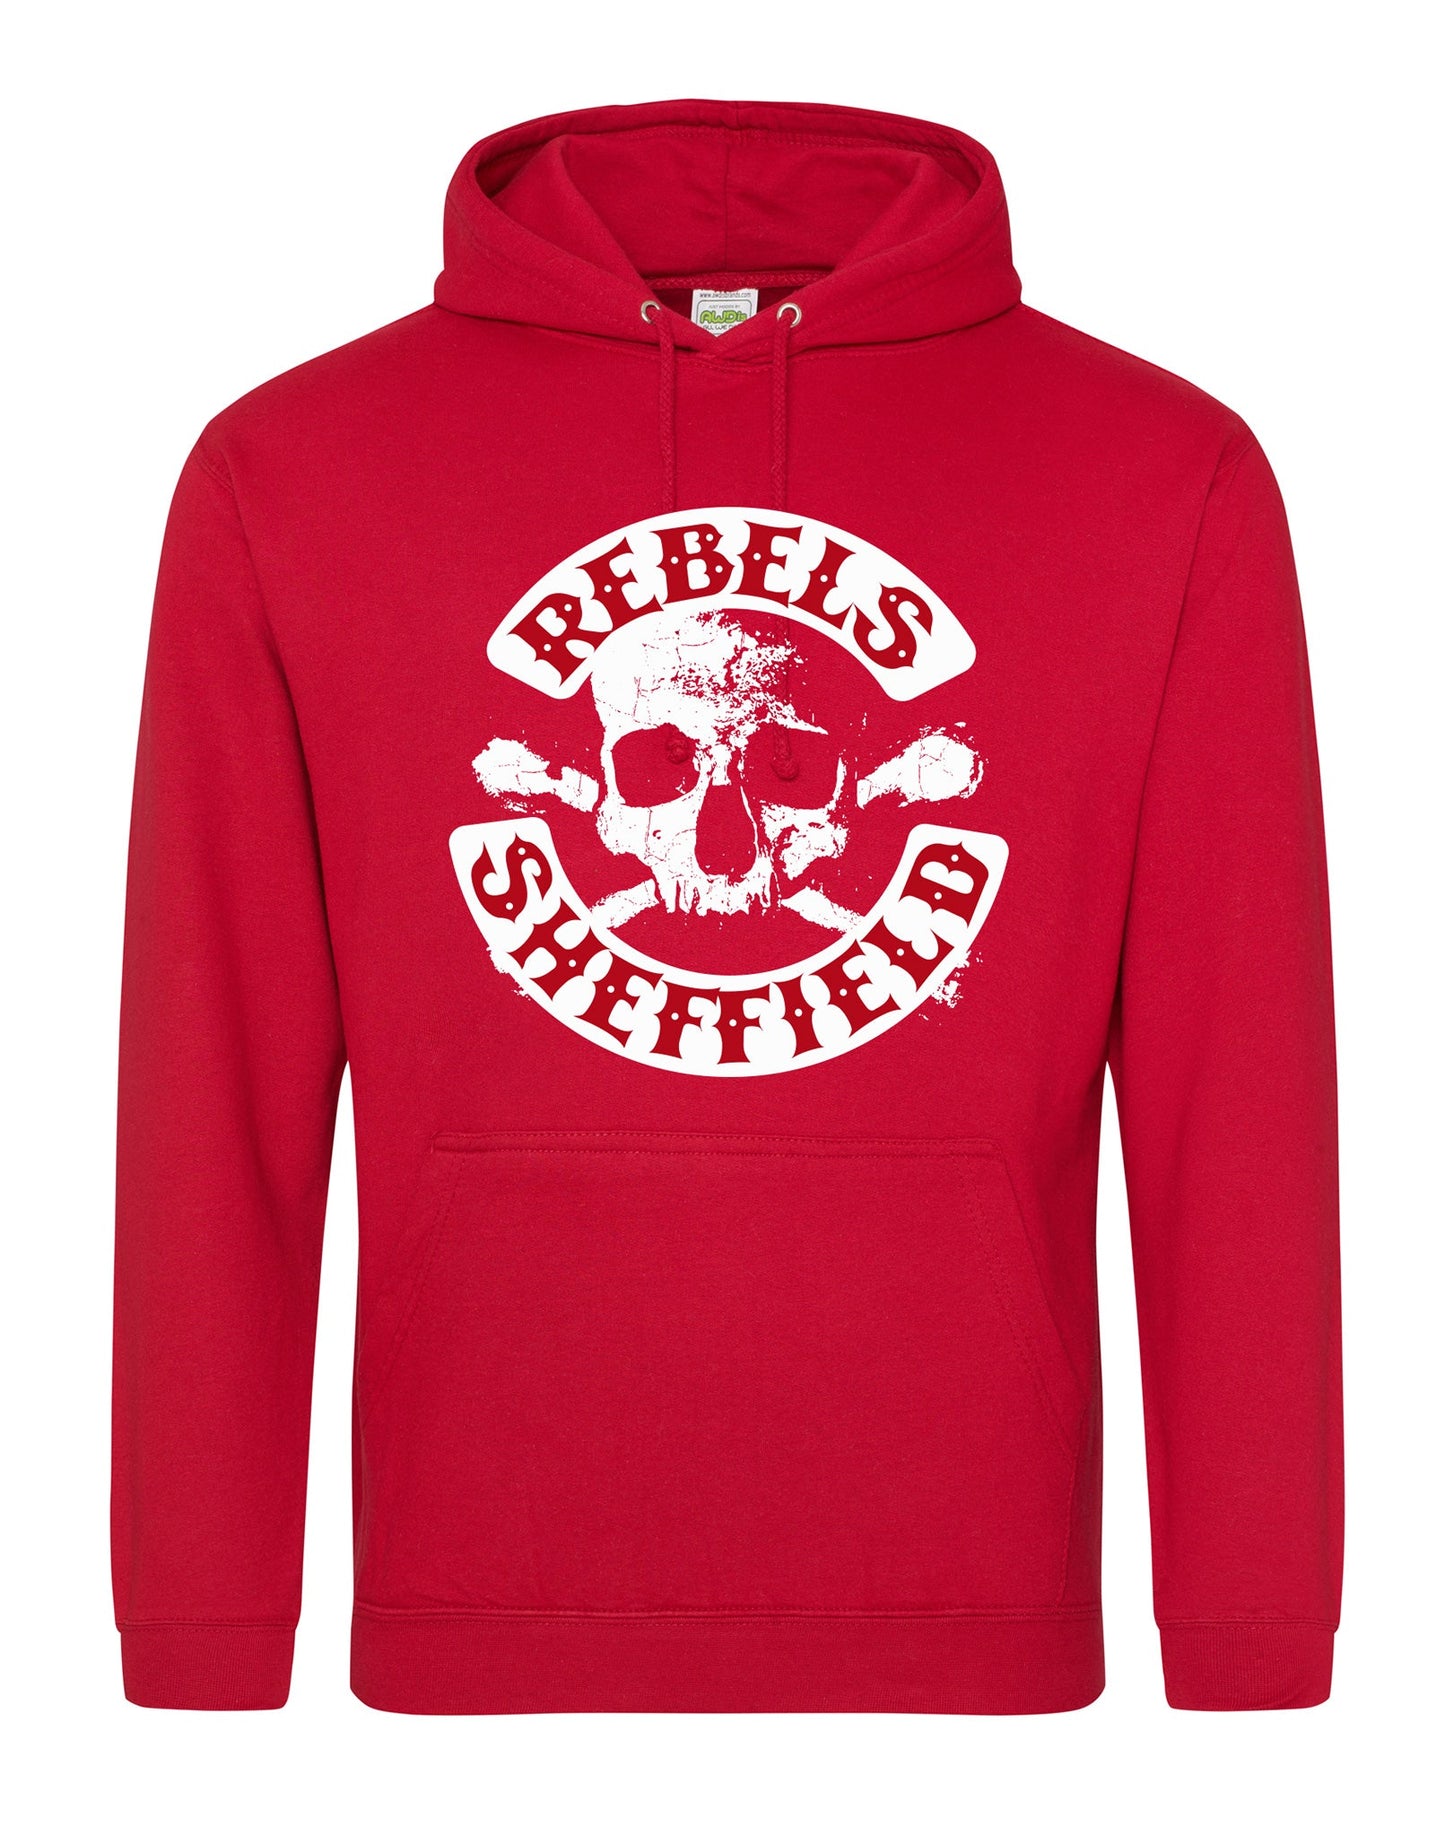 Rebels skull unisex fit hoodie - various colours - Dirty Stop Outs